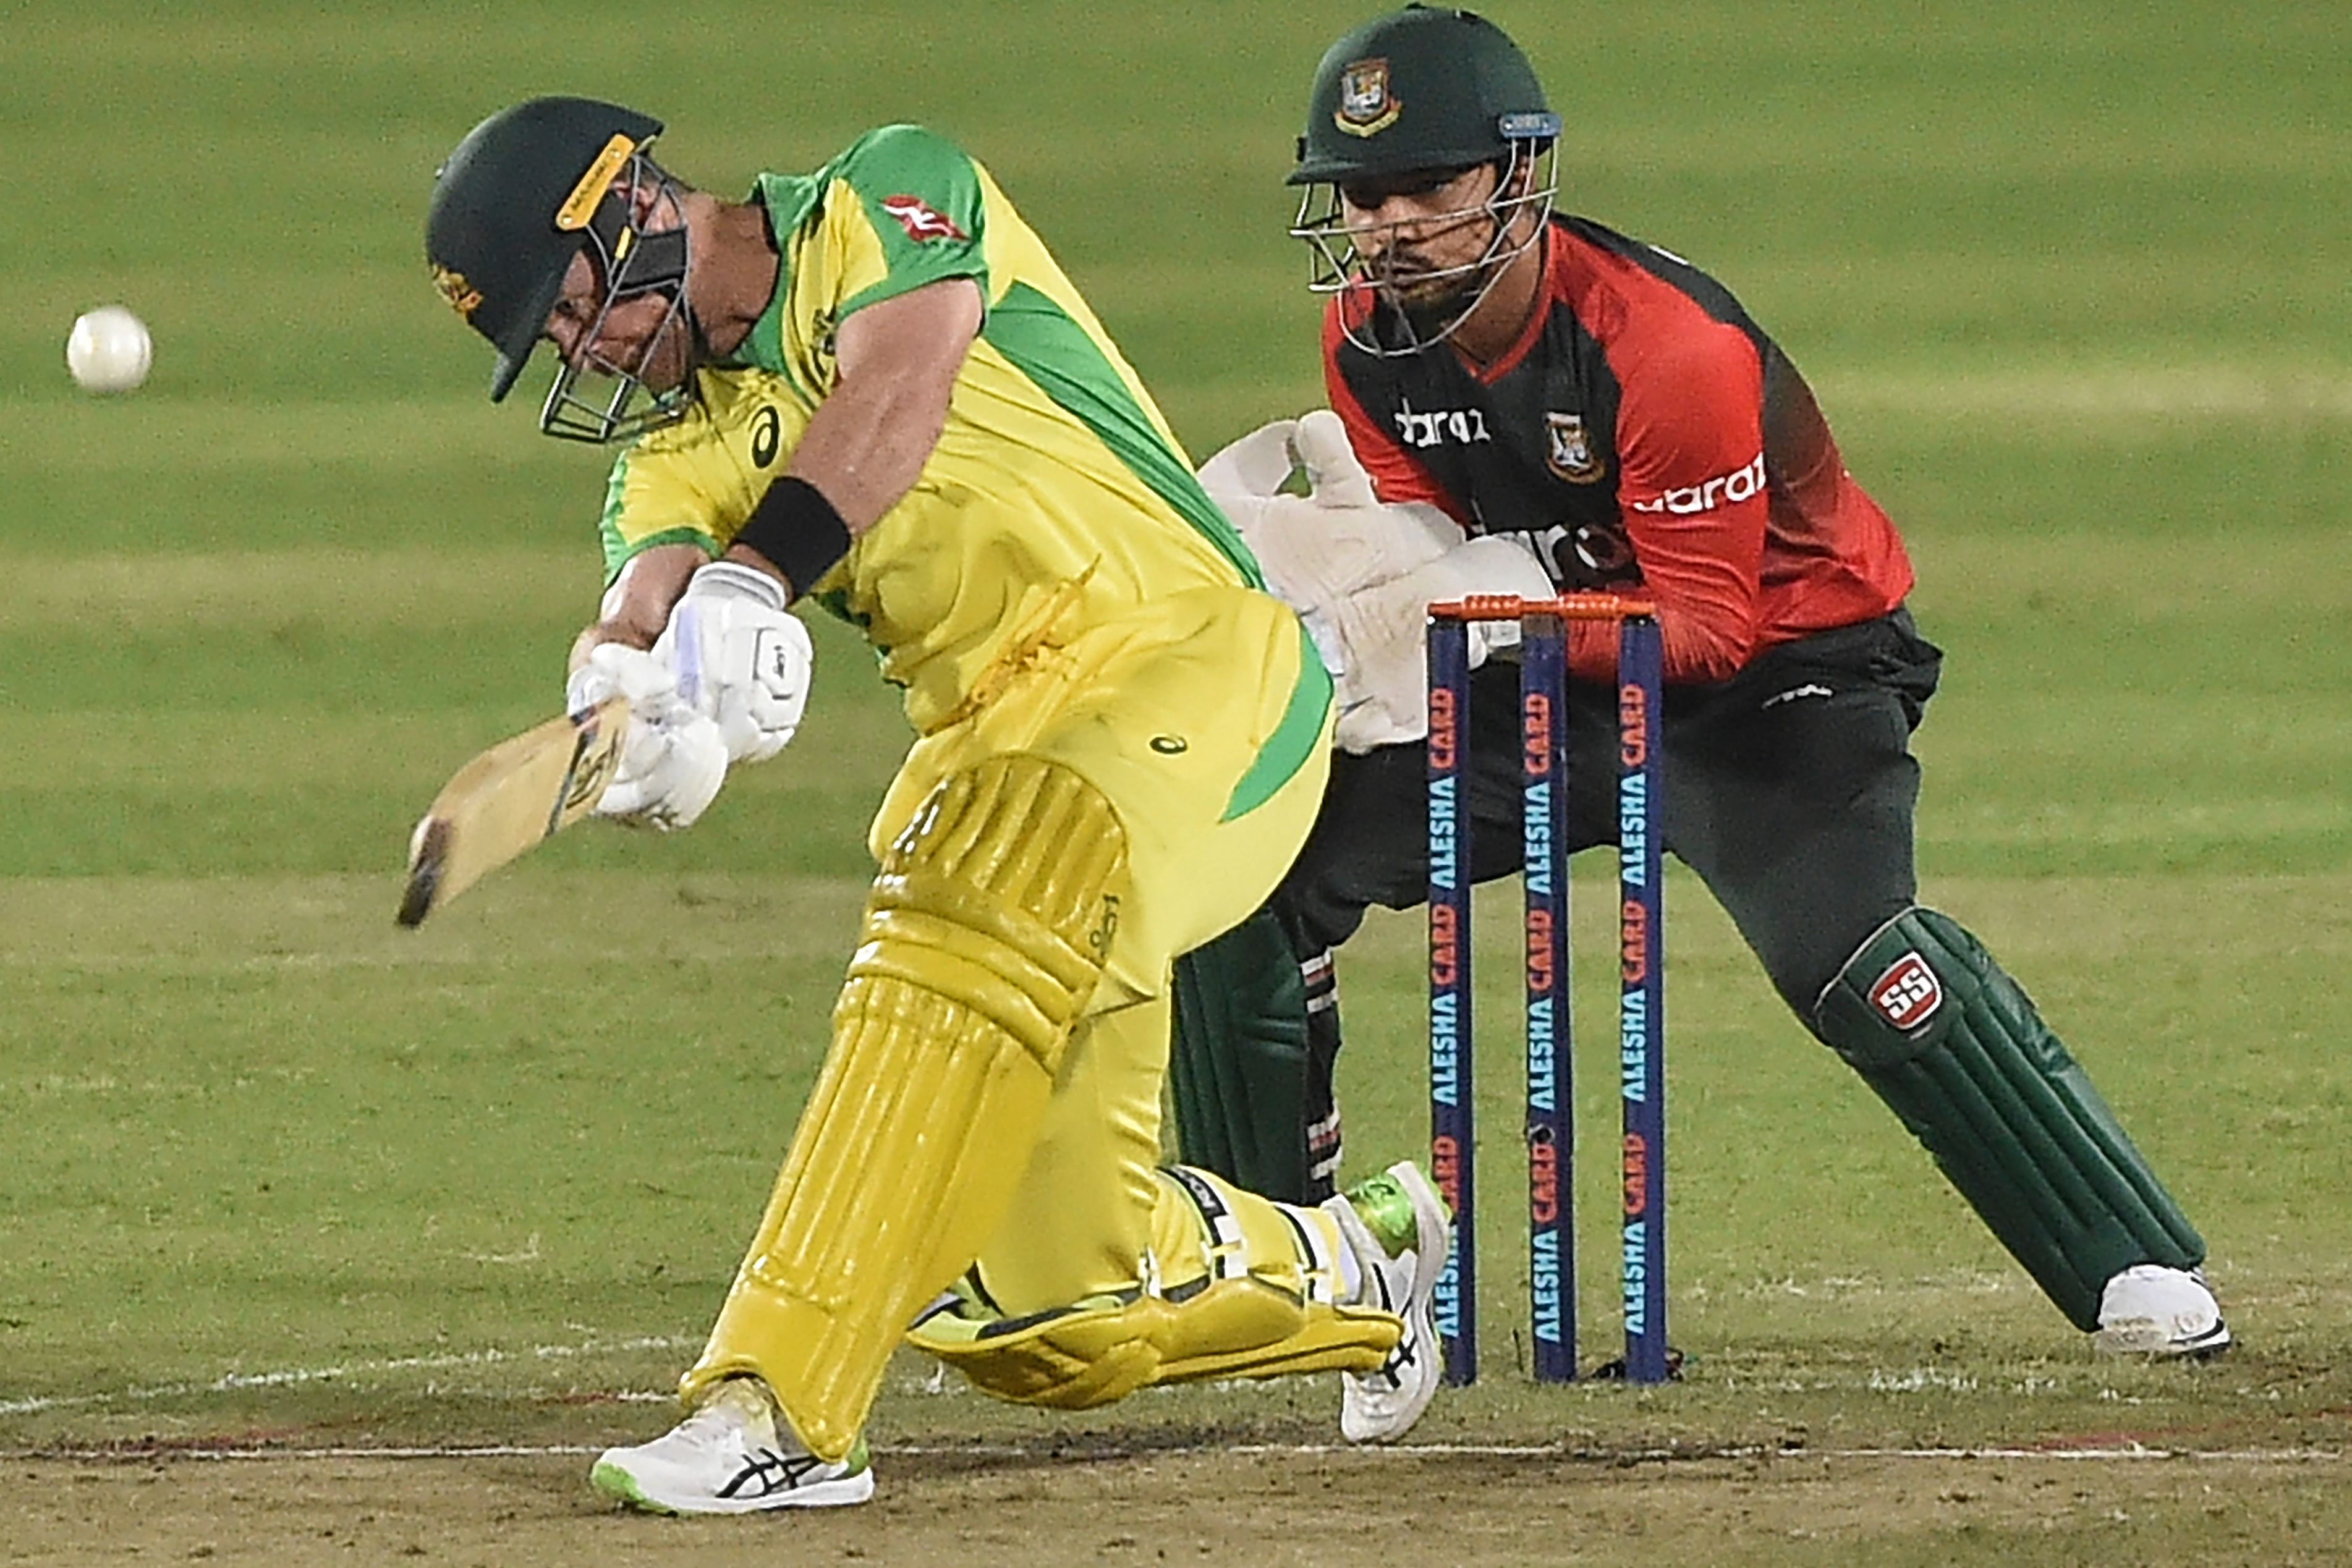 BAN vs AUS | ‘120 is like 190 here’ – Daniel Christian on tough batting conditions in Bangladesh